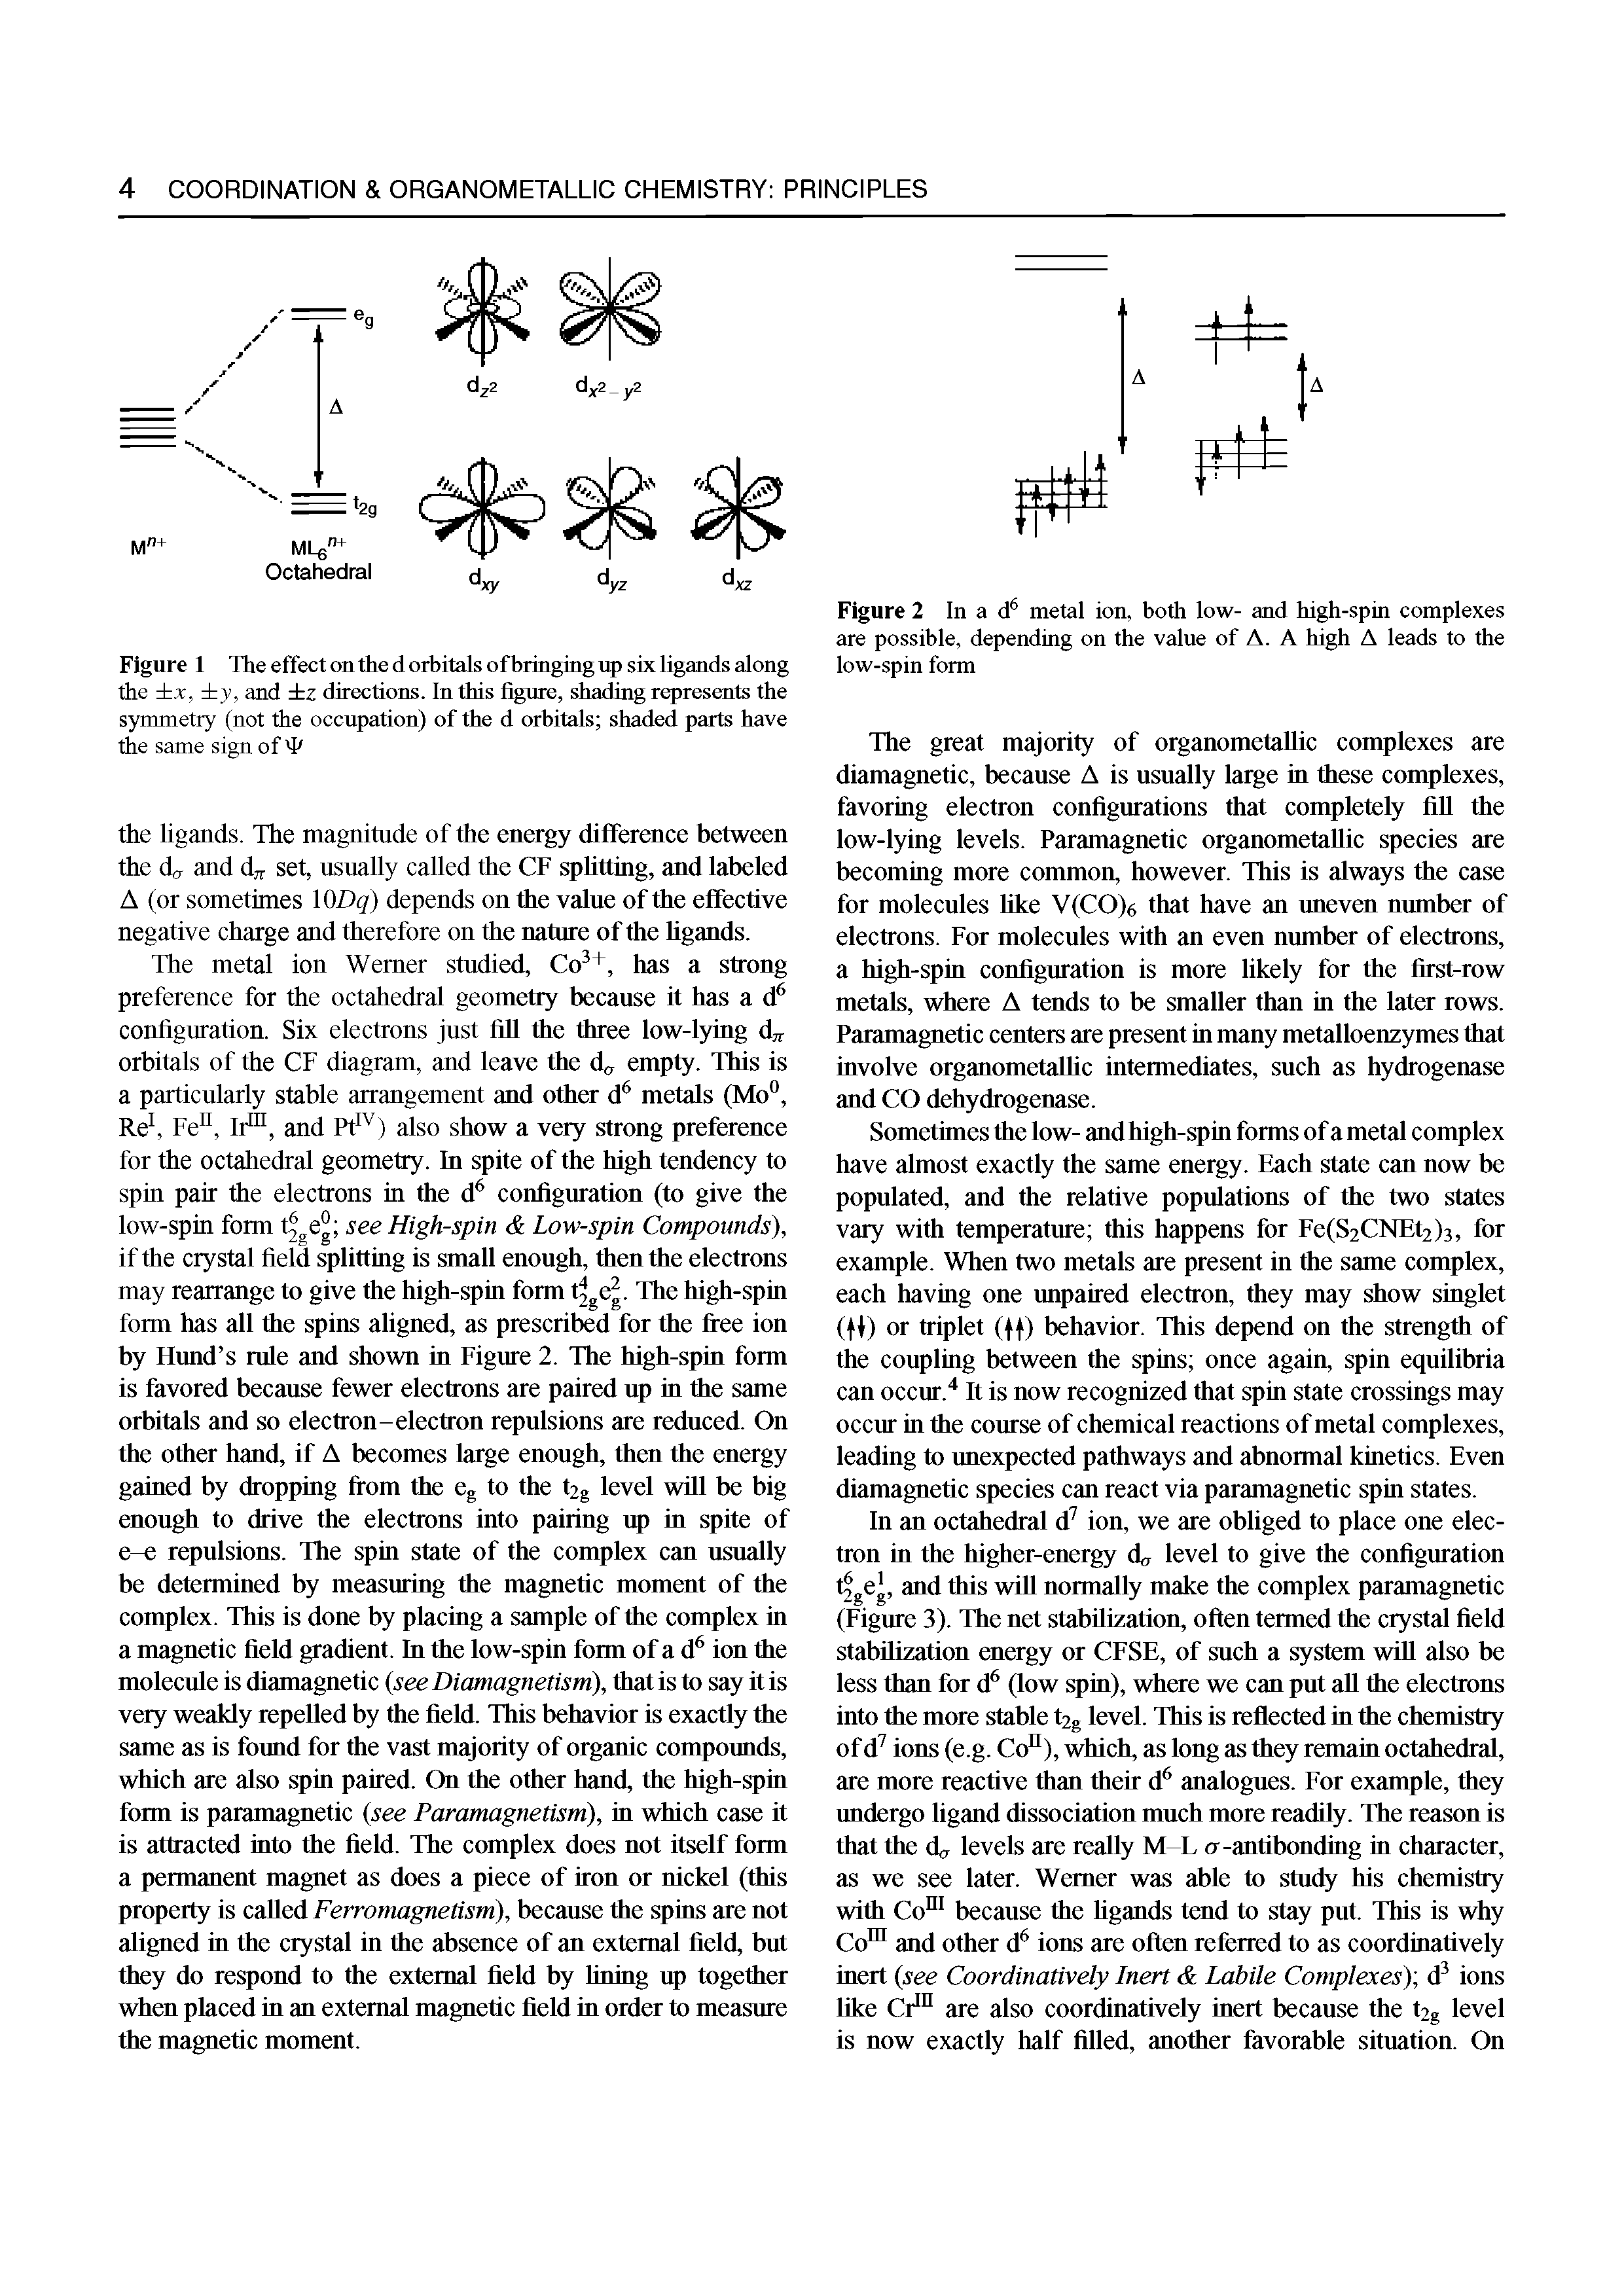 Figure 2 In a d metal ion, both low- and high-spin complexes are possible, depending on the value of A. A high A leads to the low-spin form...